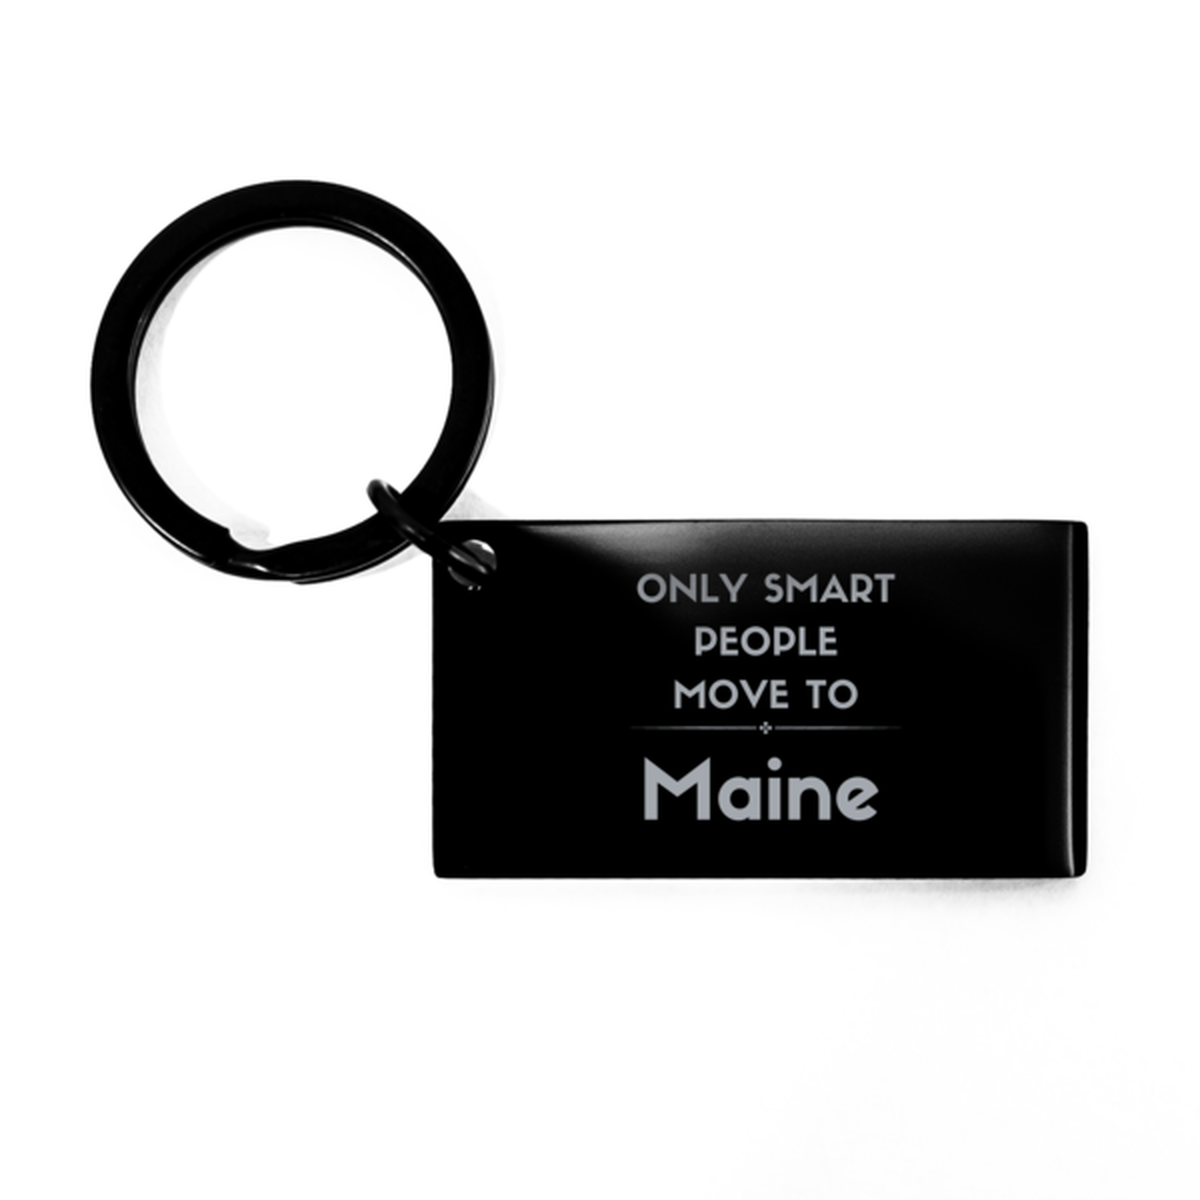 Only smart people move to Maine Keychain, Gag Gifts For Maine, Move to Maine Gifts for Friends Coworker Funny Saying Quote